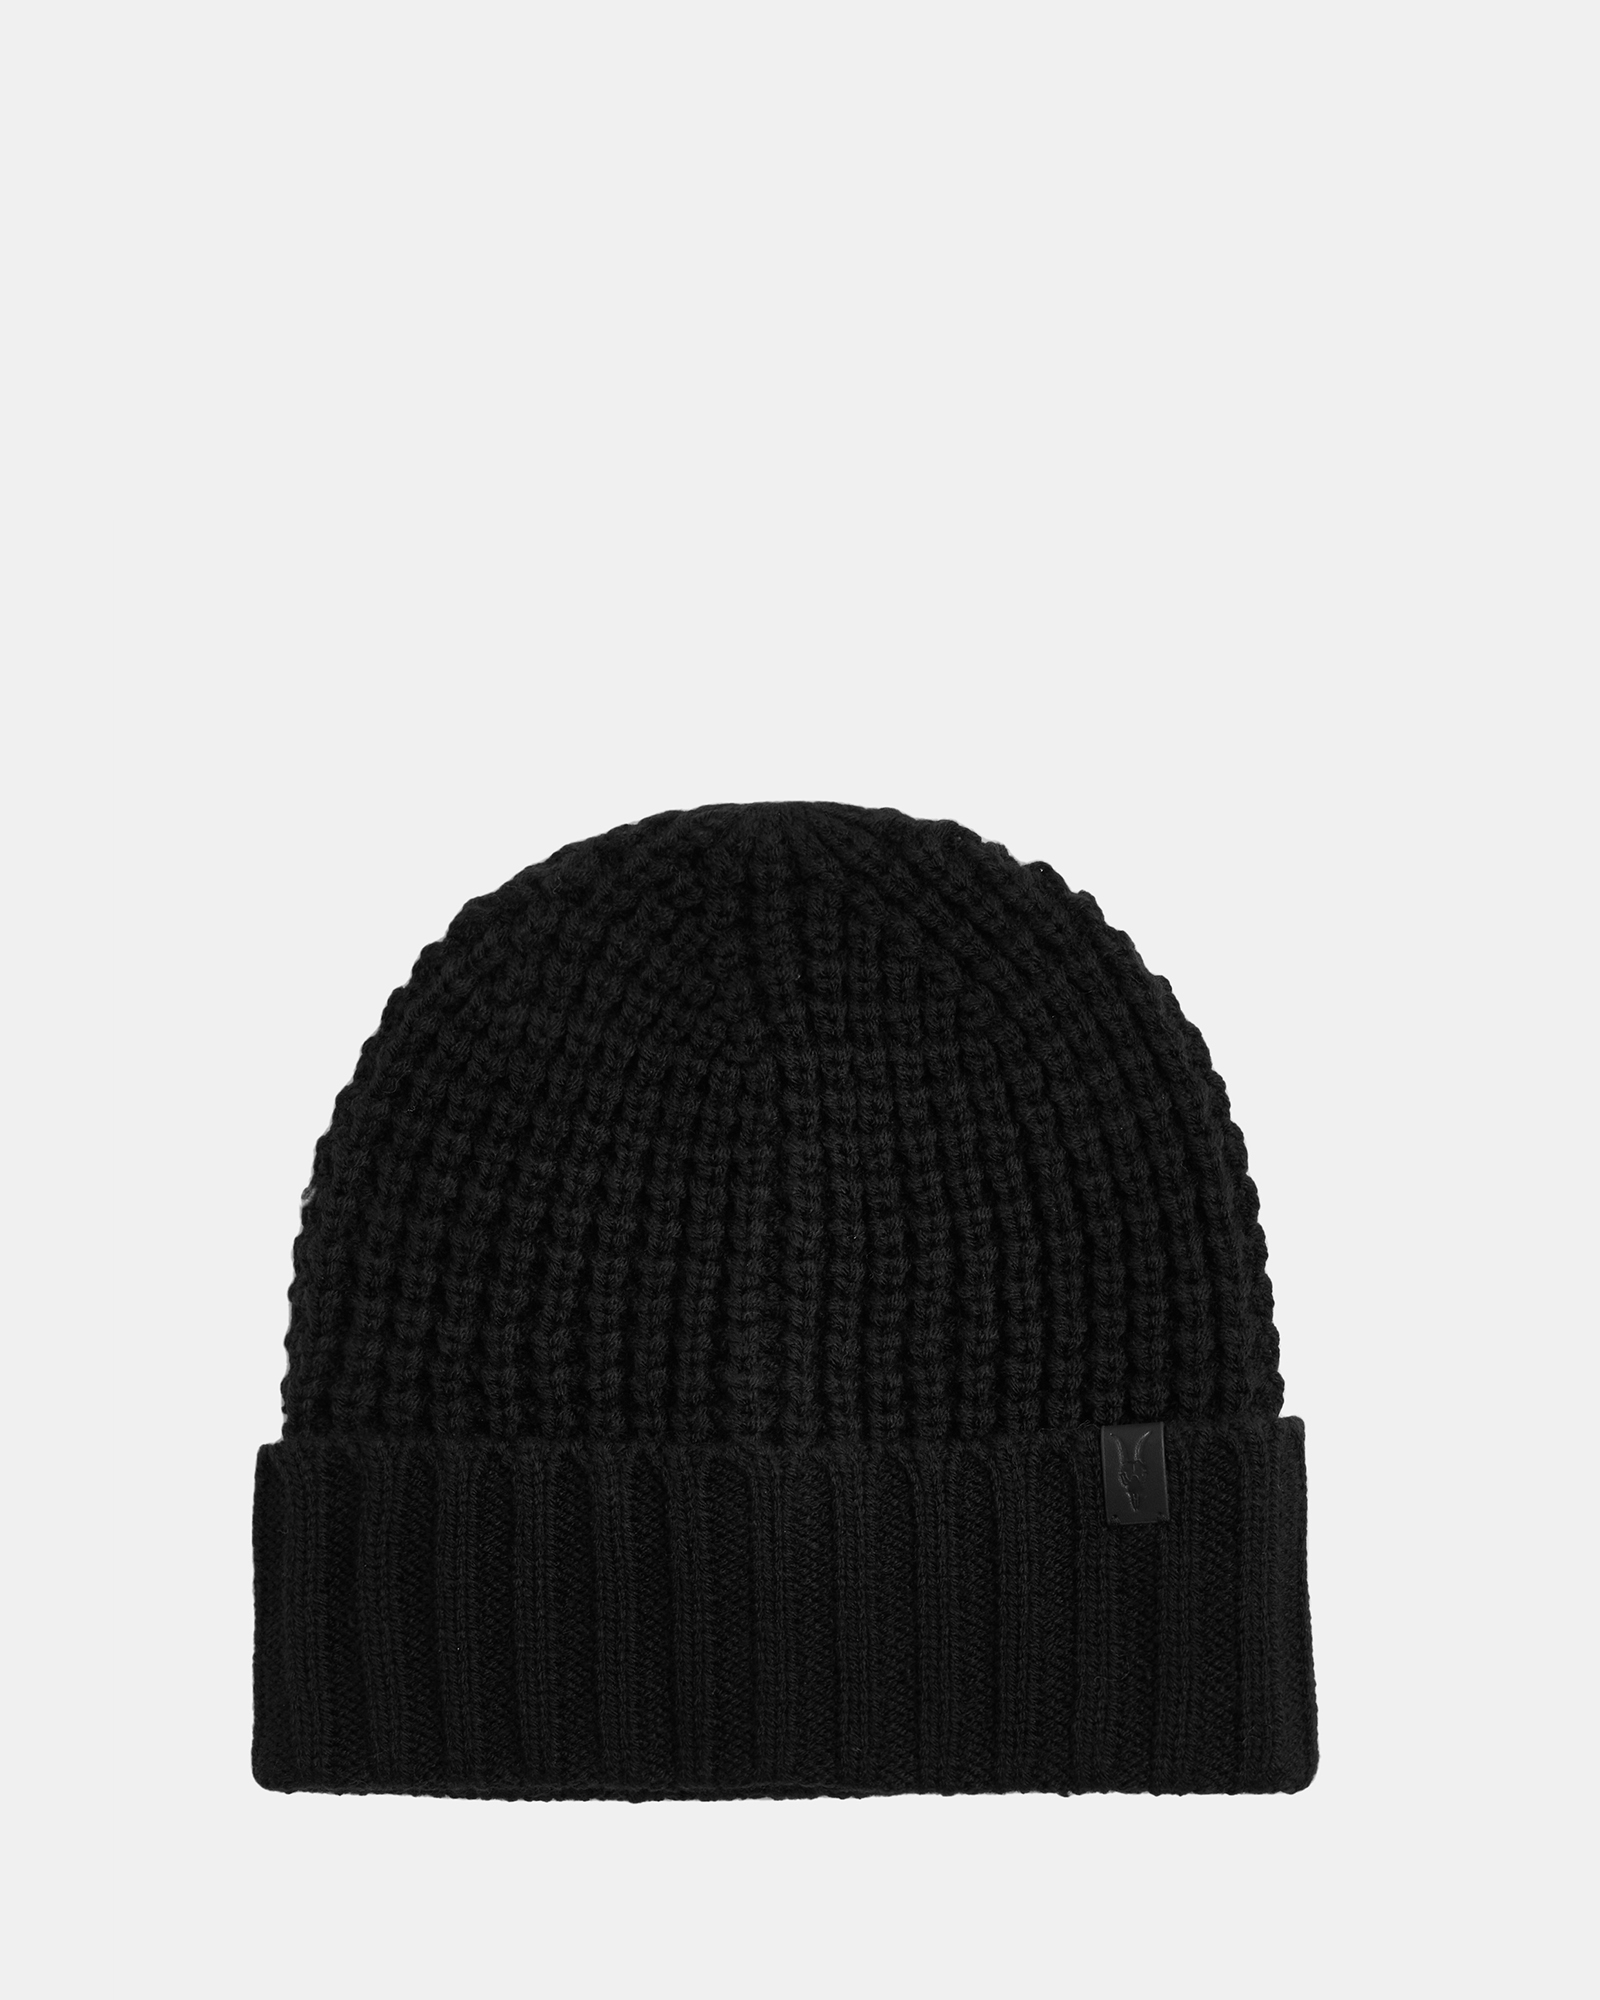 AllSaints Men's Knitted Nevada Beanie, Black, Size: One Size